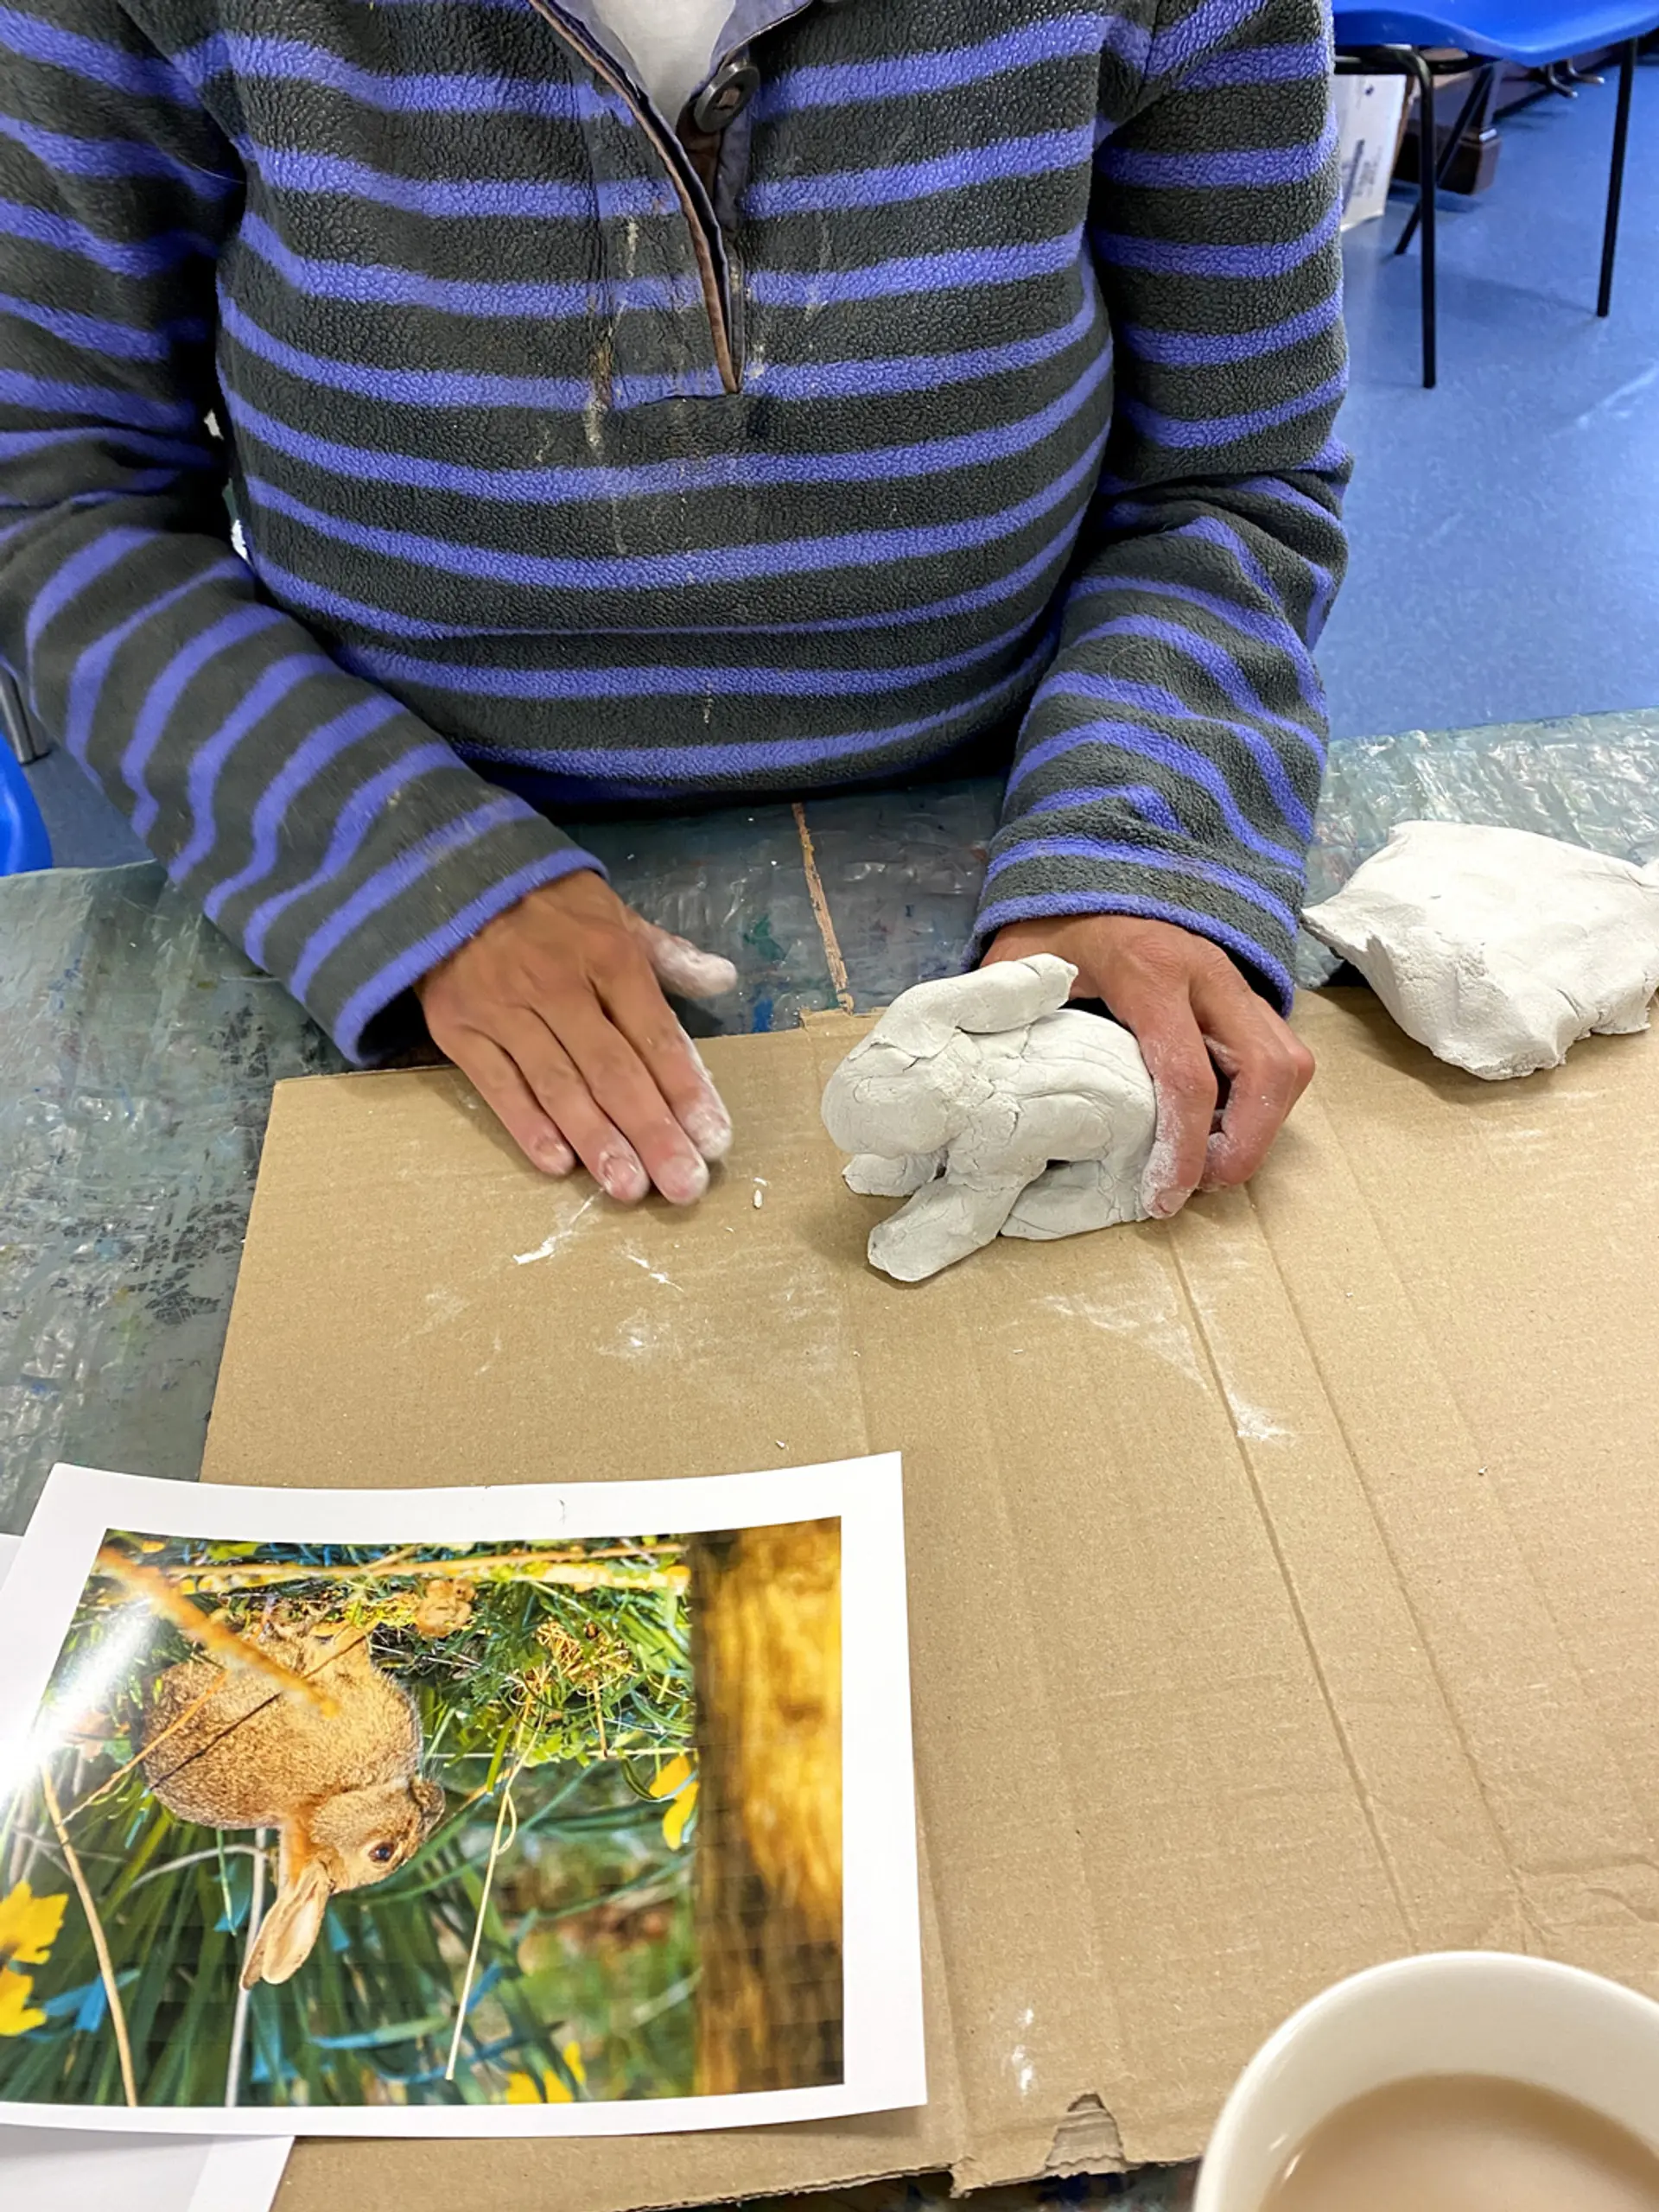 An artist is working with air drying clay on a piece of cardboard. They have an image of a rabbit in front of them and they are sculpting the clay into the shape of a rabbit. 